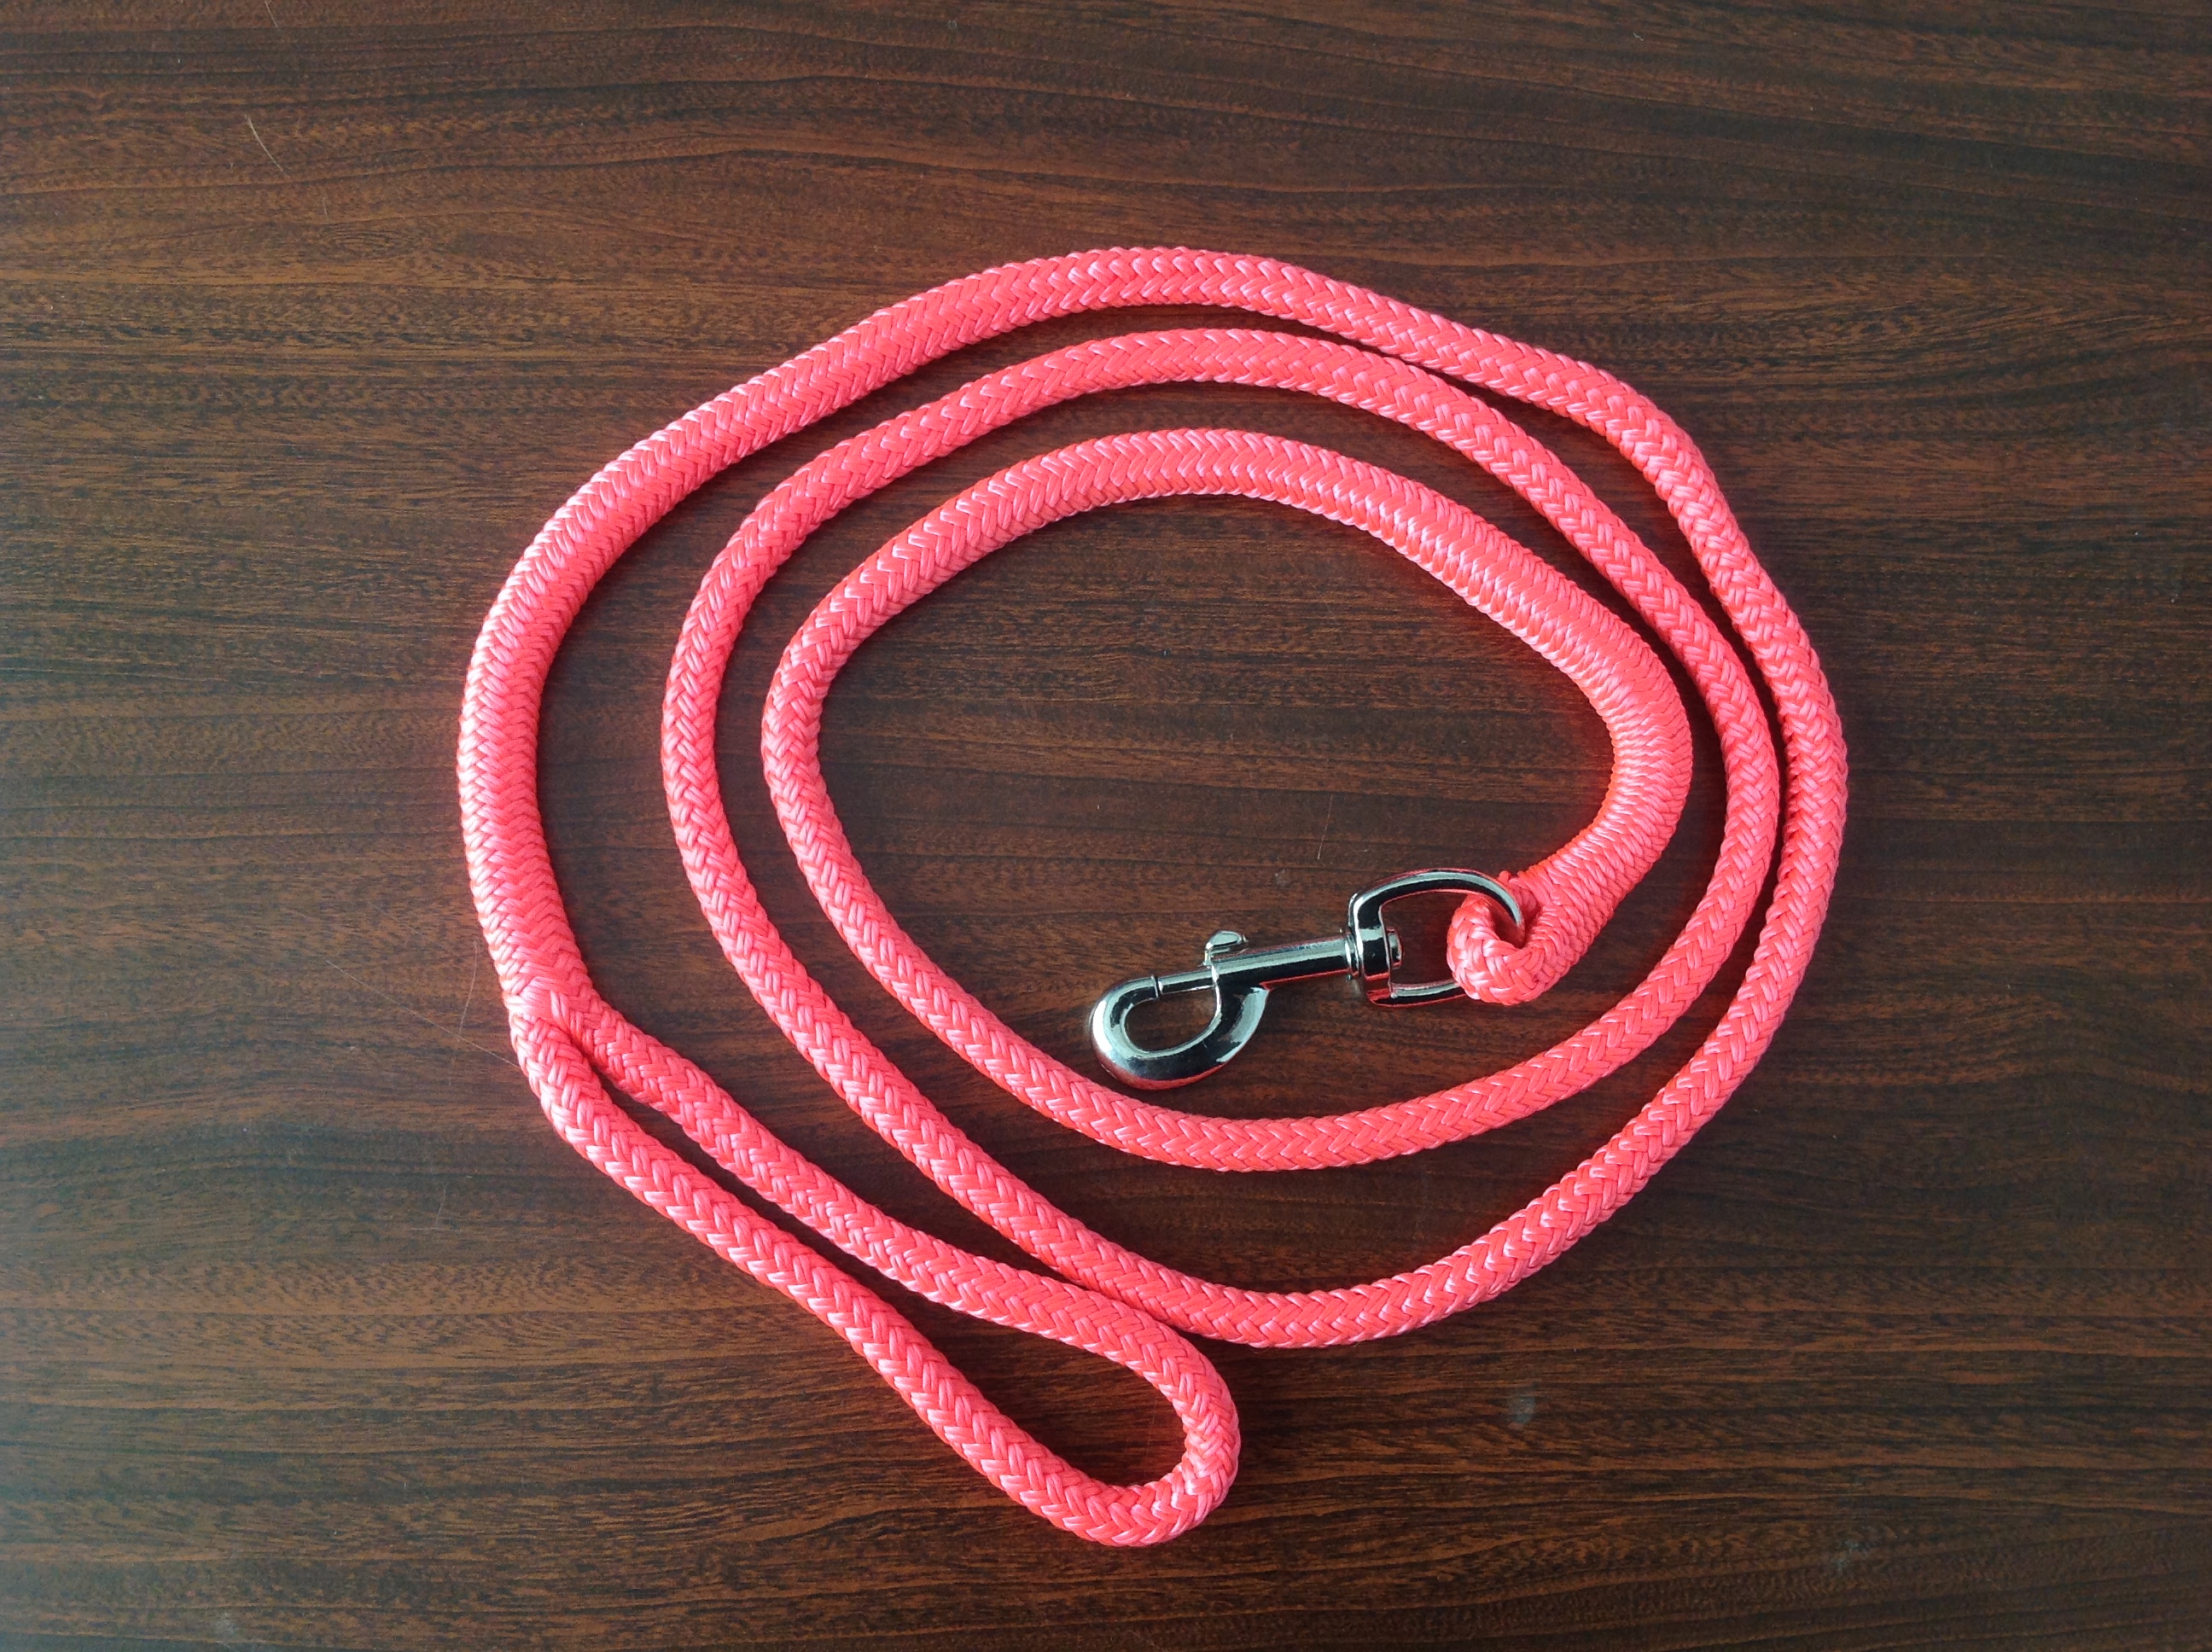 R&W Rope Sales Shop's online Arteplas Three Strand Rope - Recycled Plastic,  P.E.T. Delivery